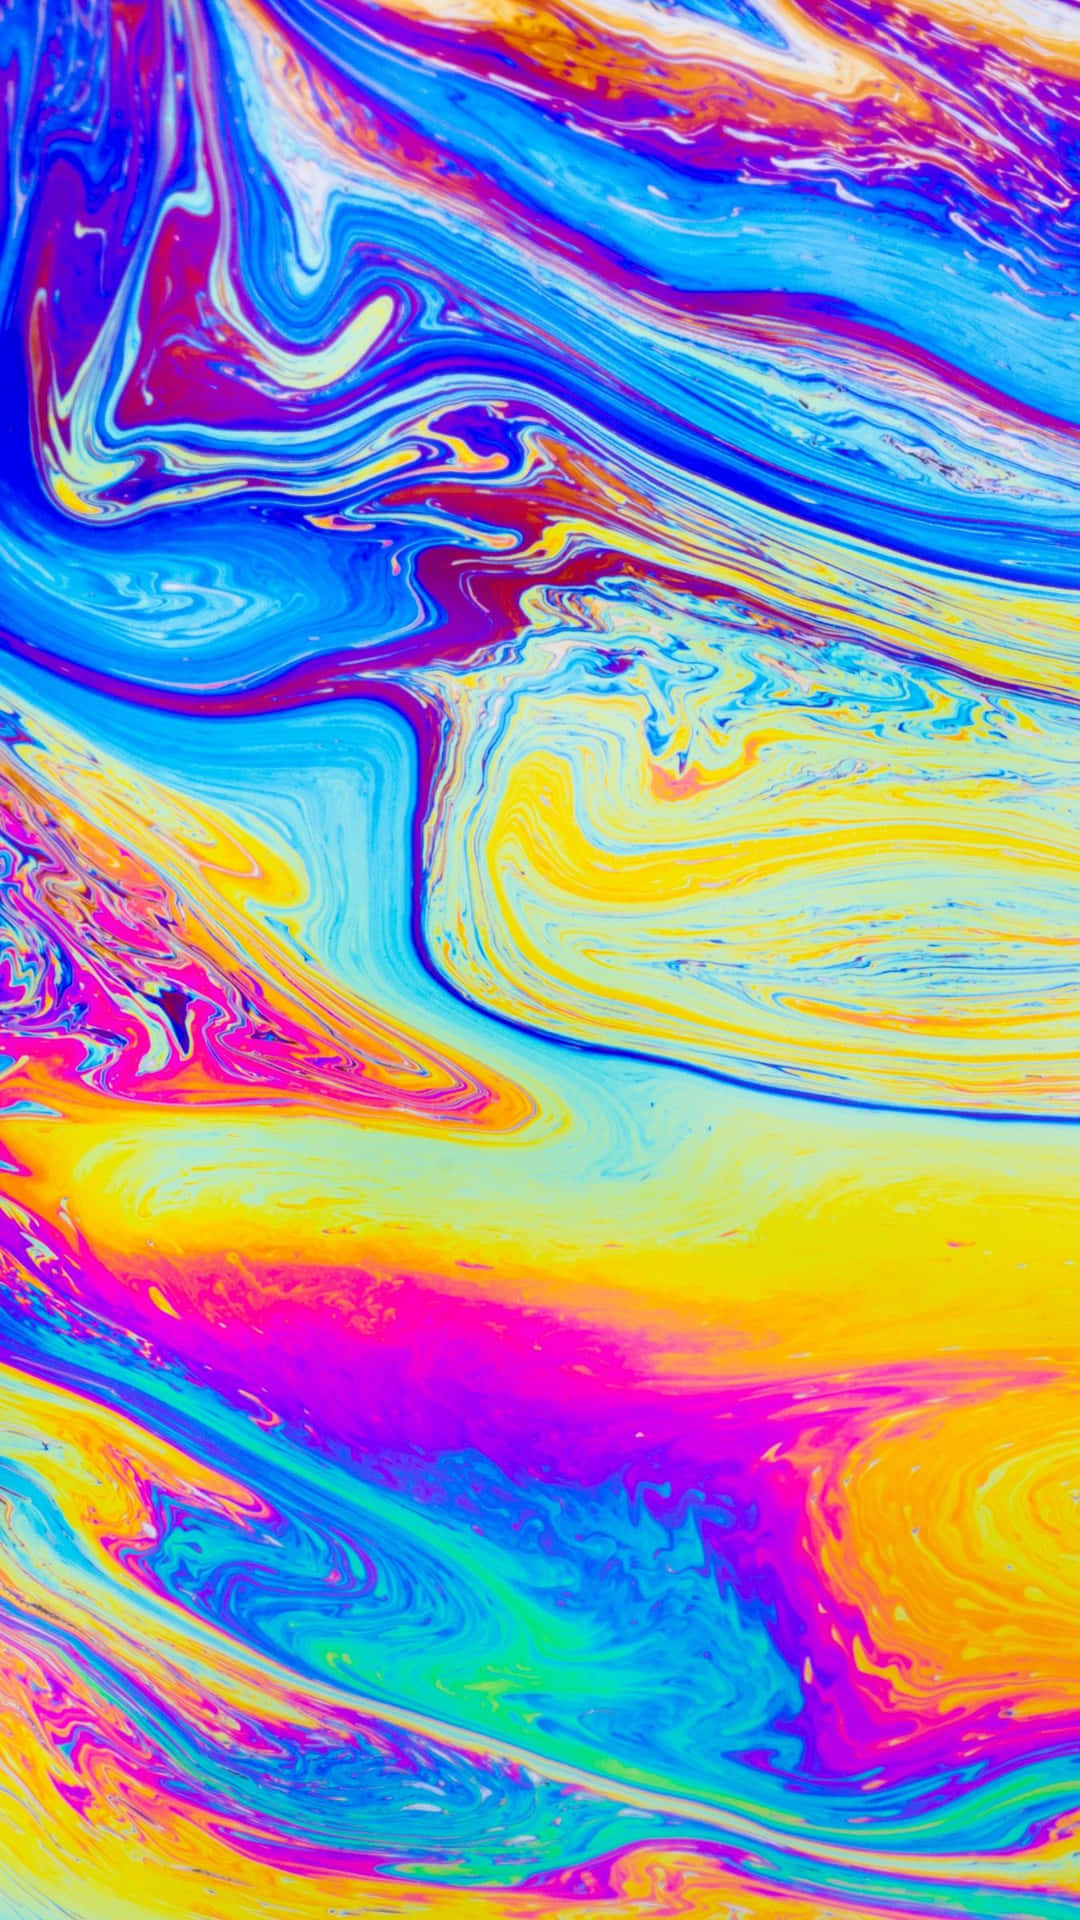 A Colorful Abstract Painting With Swirls Of Liquid